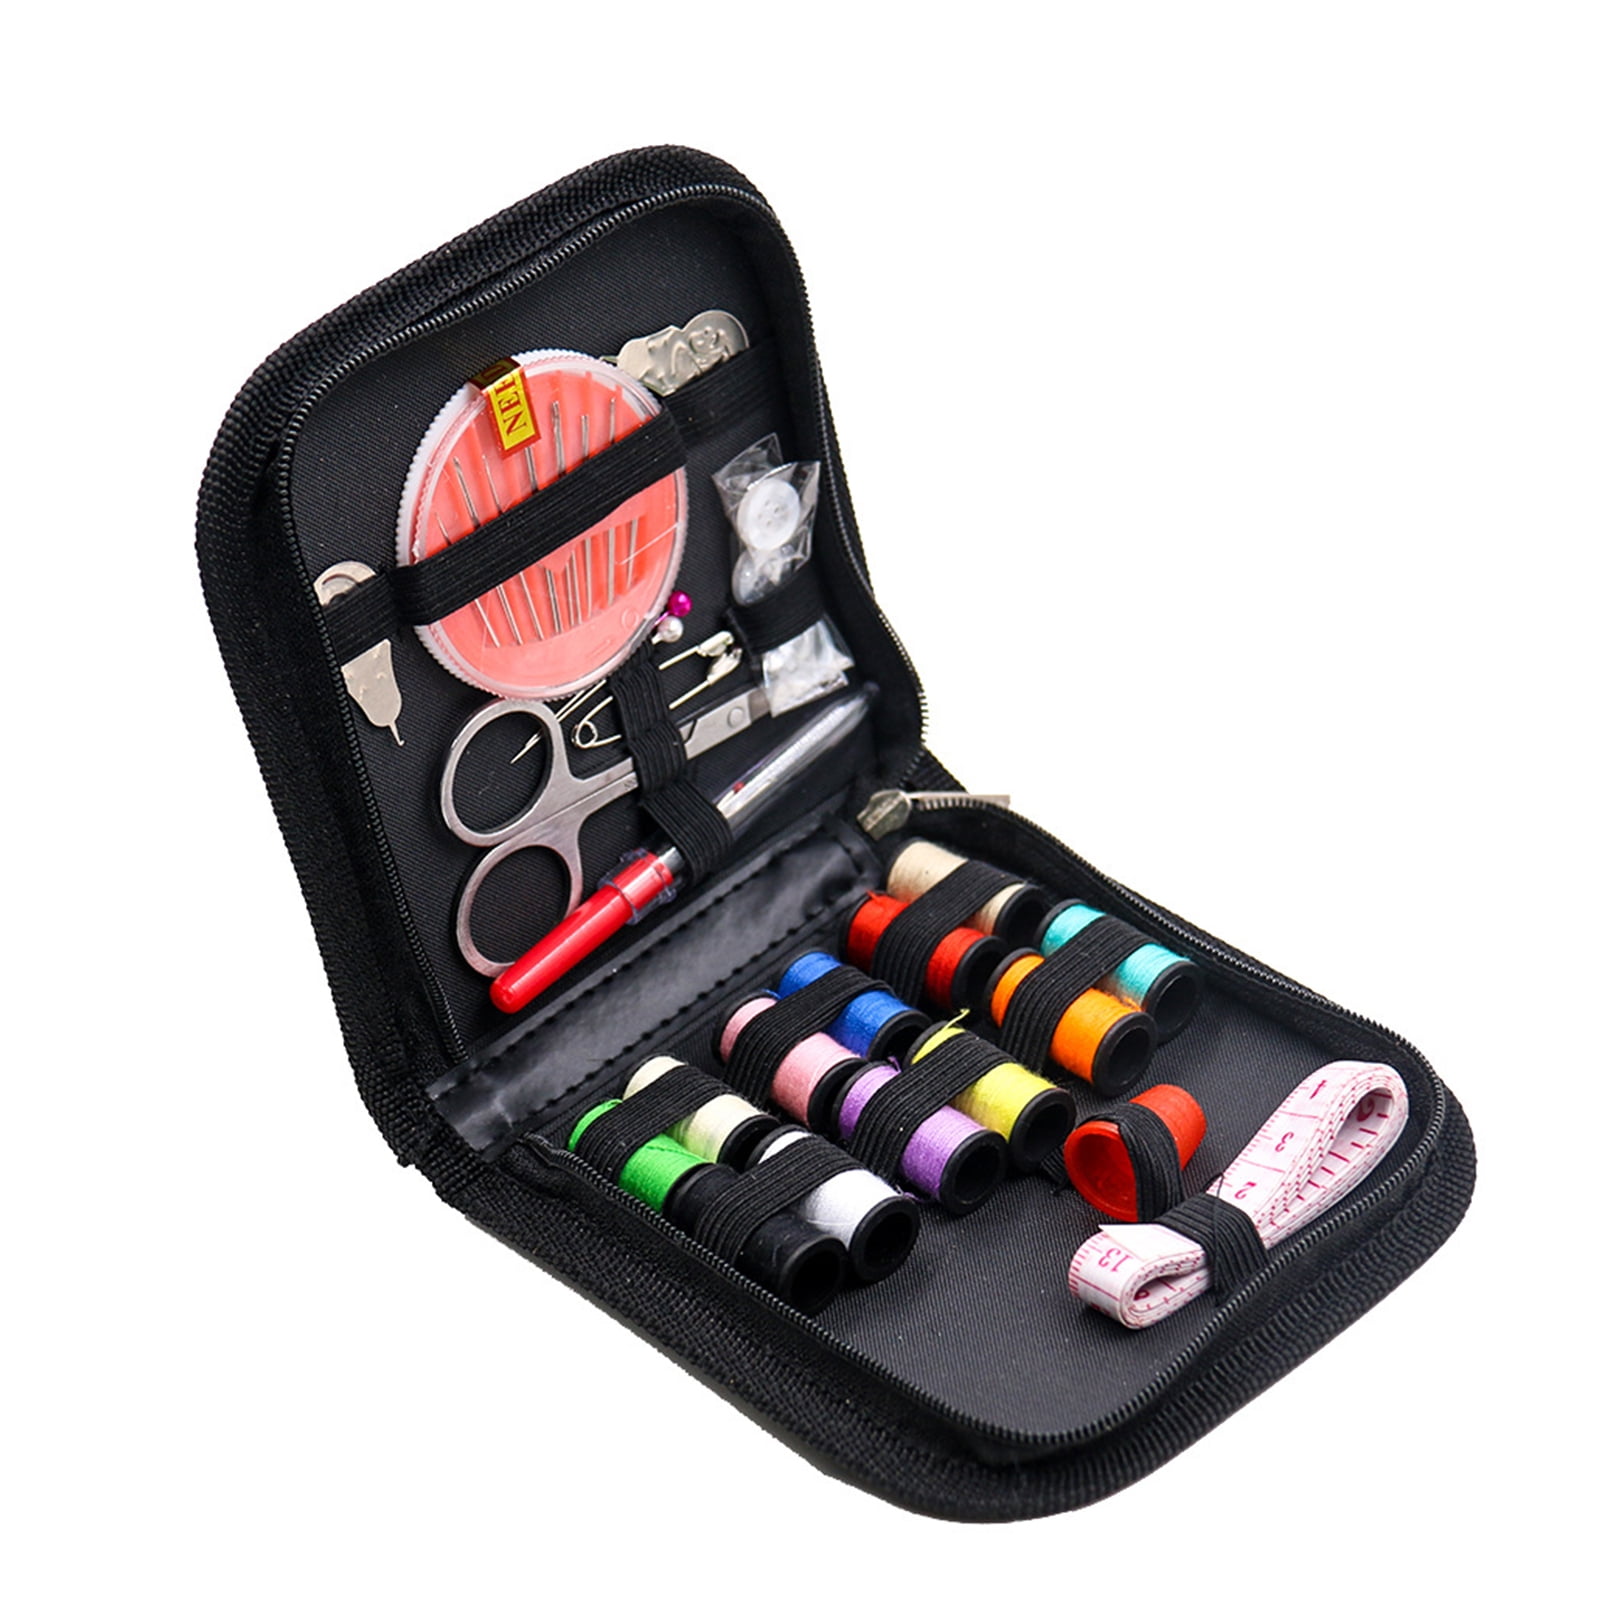 INTBUYING Mini Sewing Kit for Adults with Sewing Supplies Home Travel  Emergency